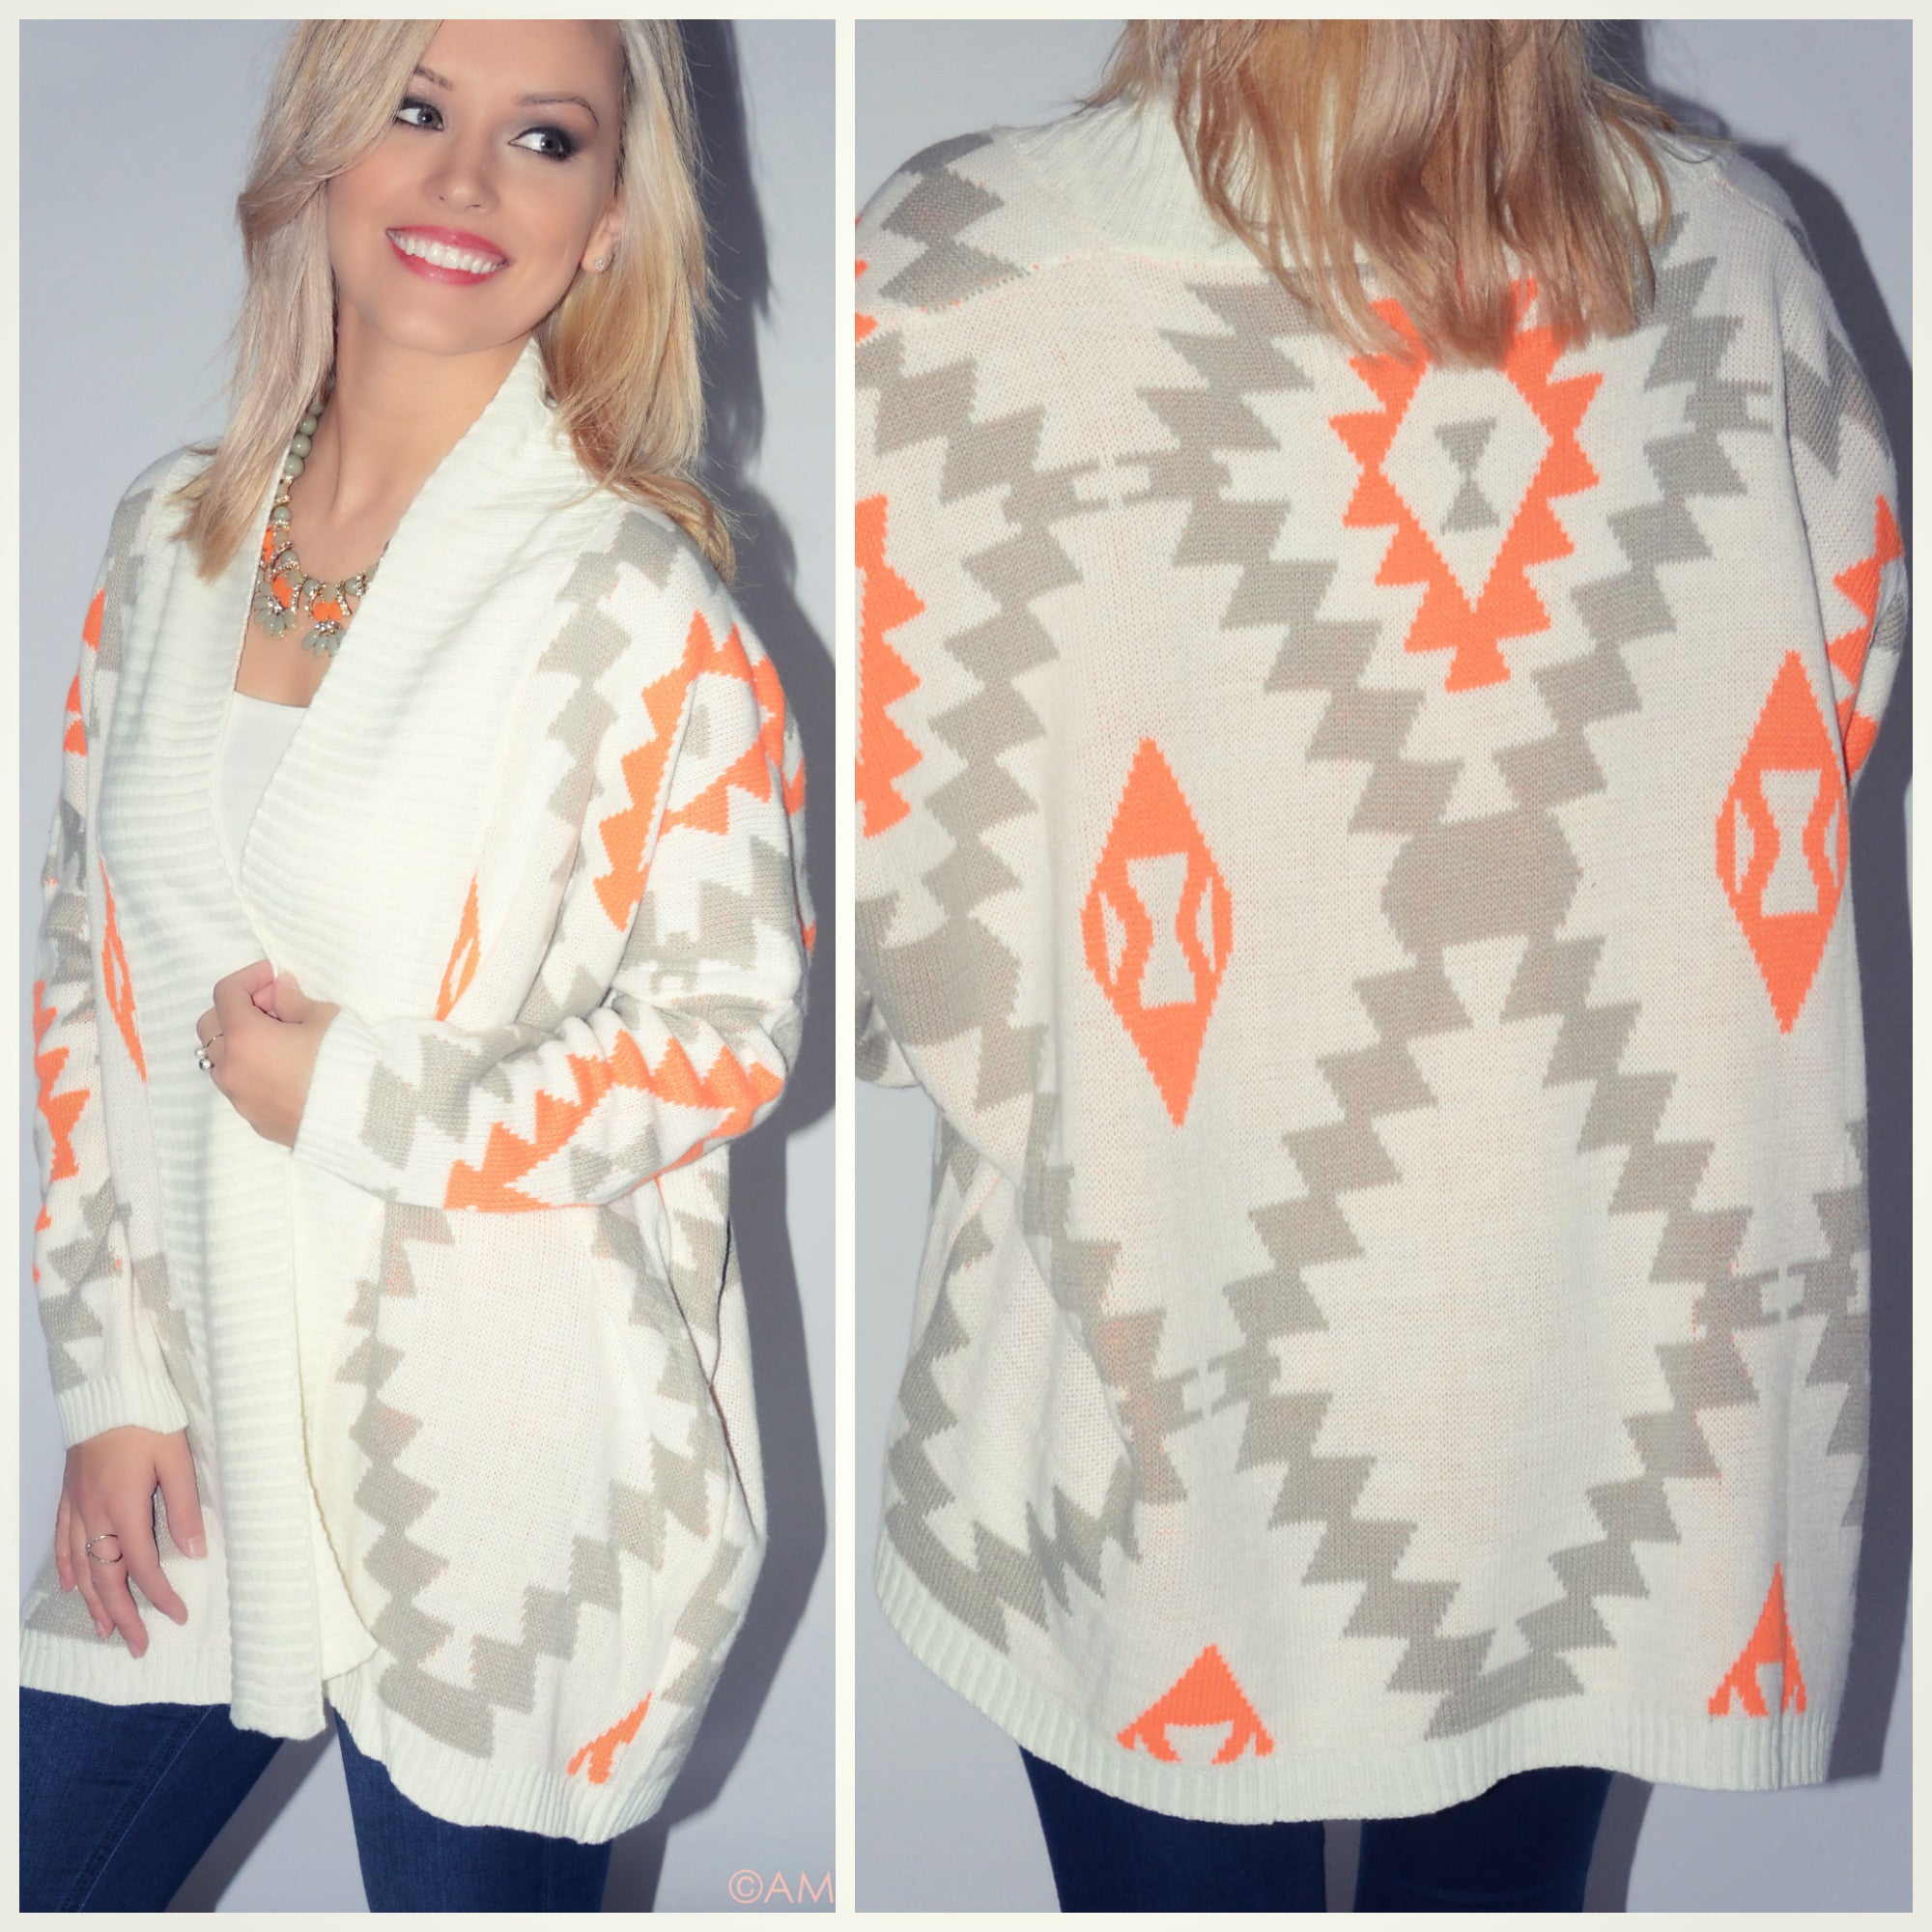 When Skies Are Gray Aztec Print Cardigan